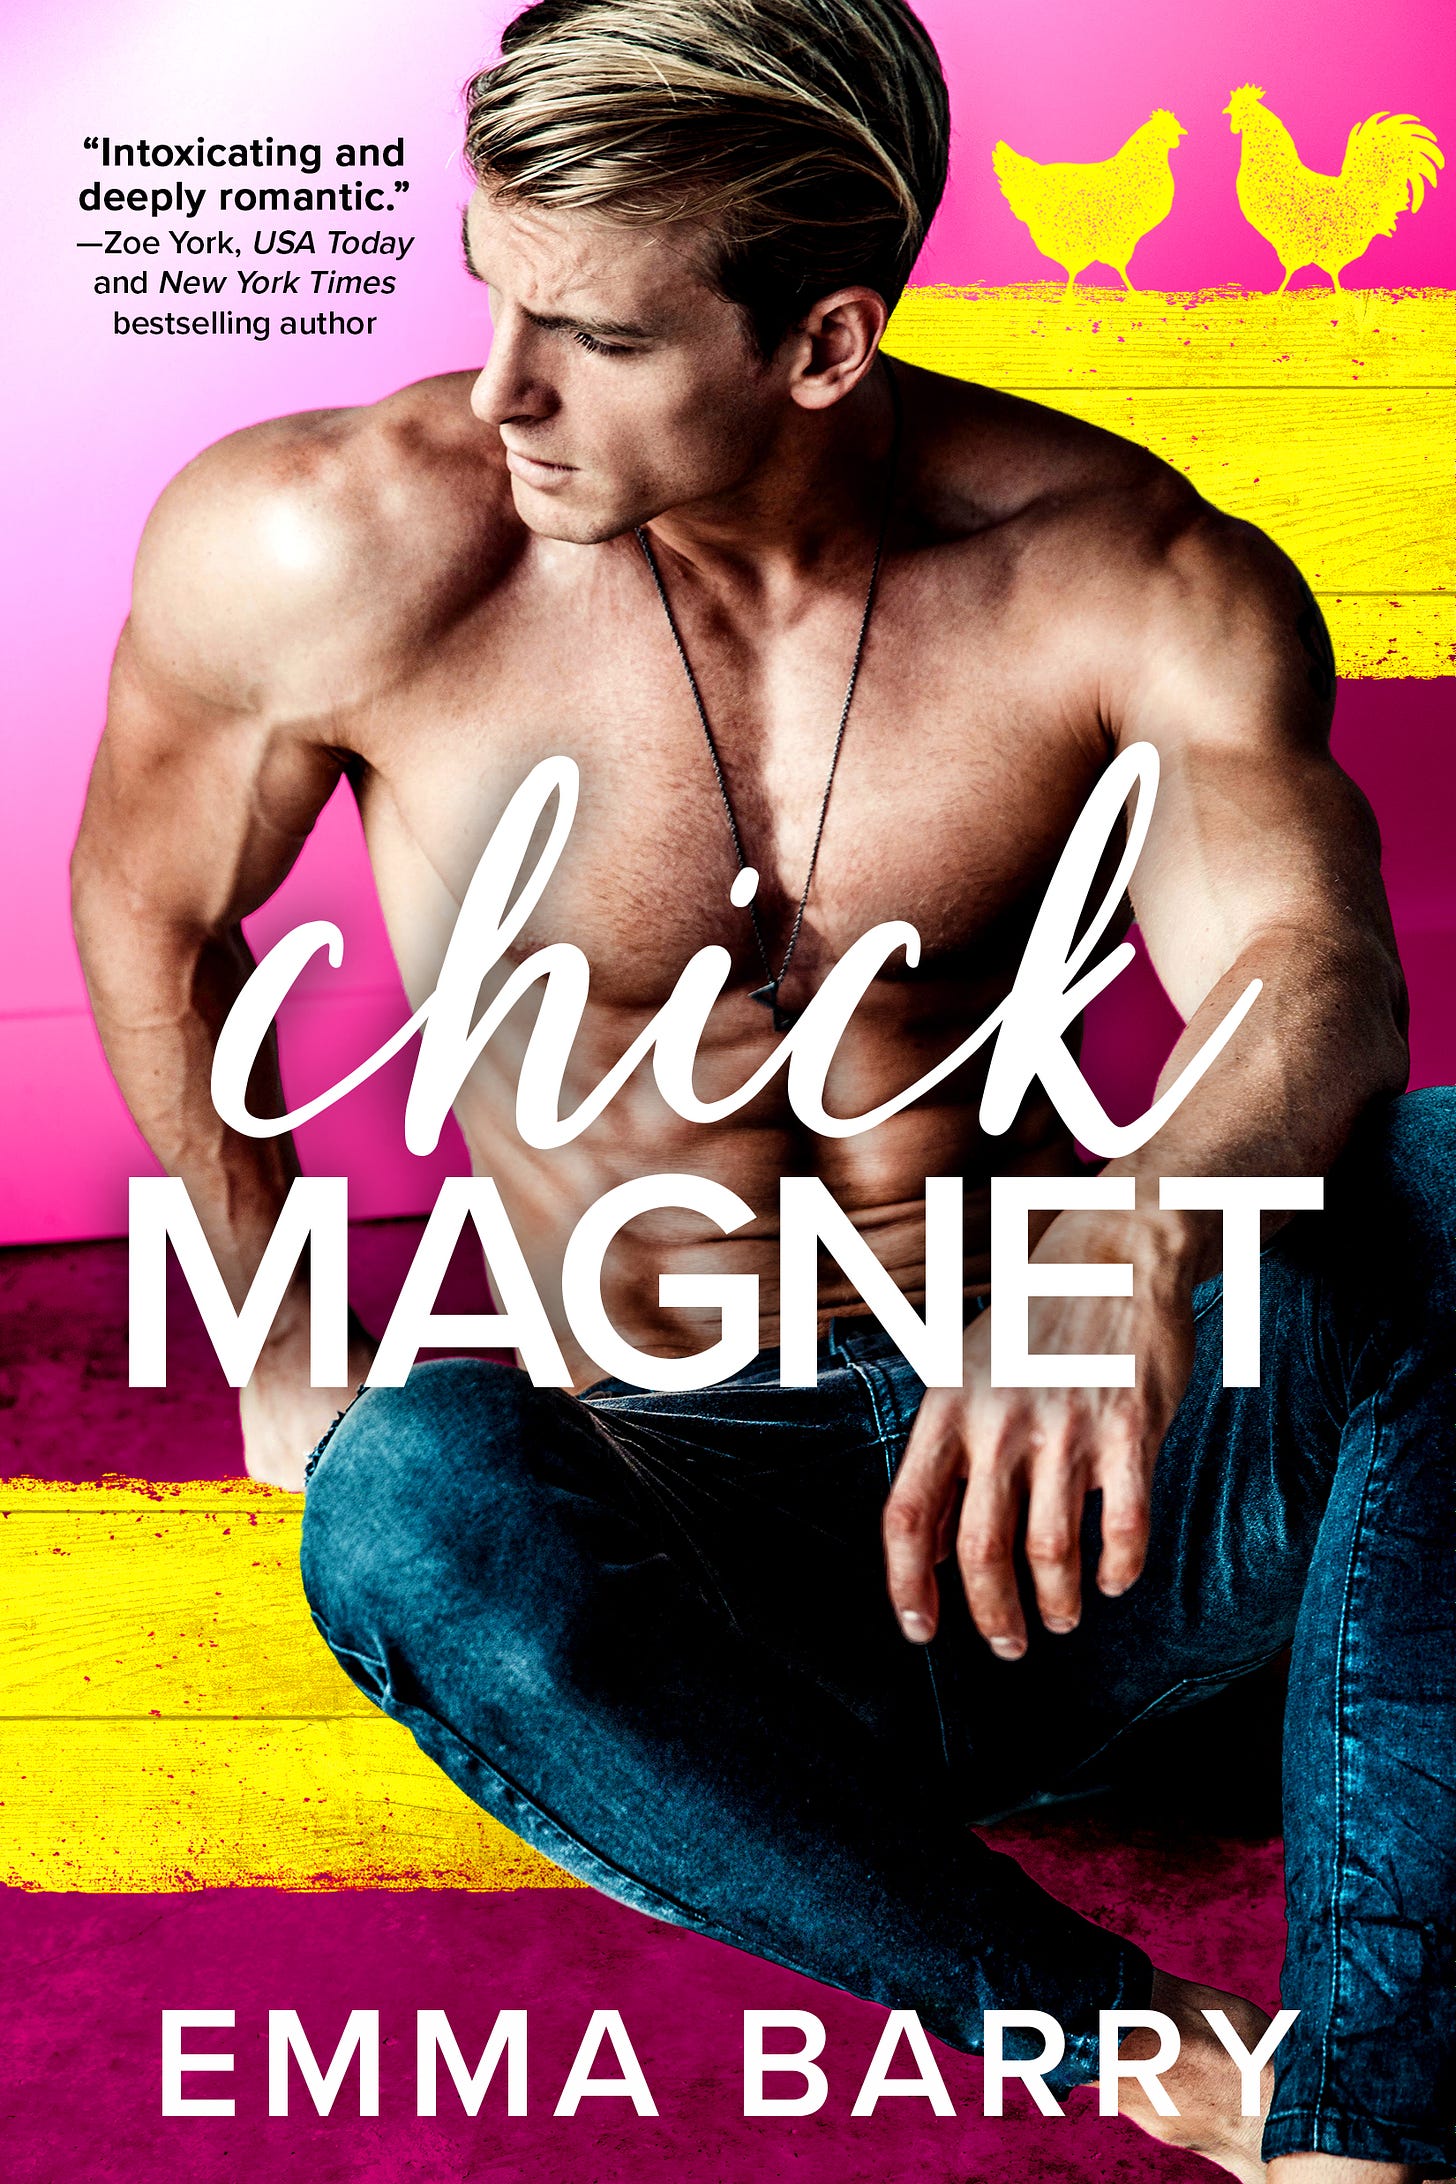 Emma Barry's book Chick Magnet. Shirtless blonde white man, sitting, wearing jeans. Background is pink, and yellow and burgundy stripes with chicken sihouettes at the top.